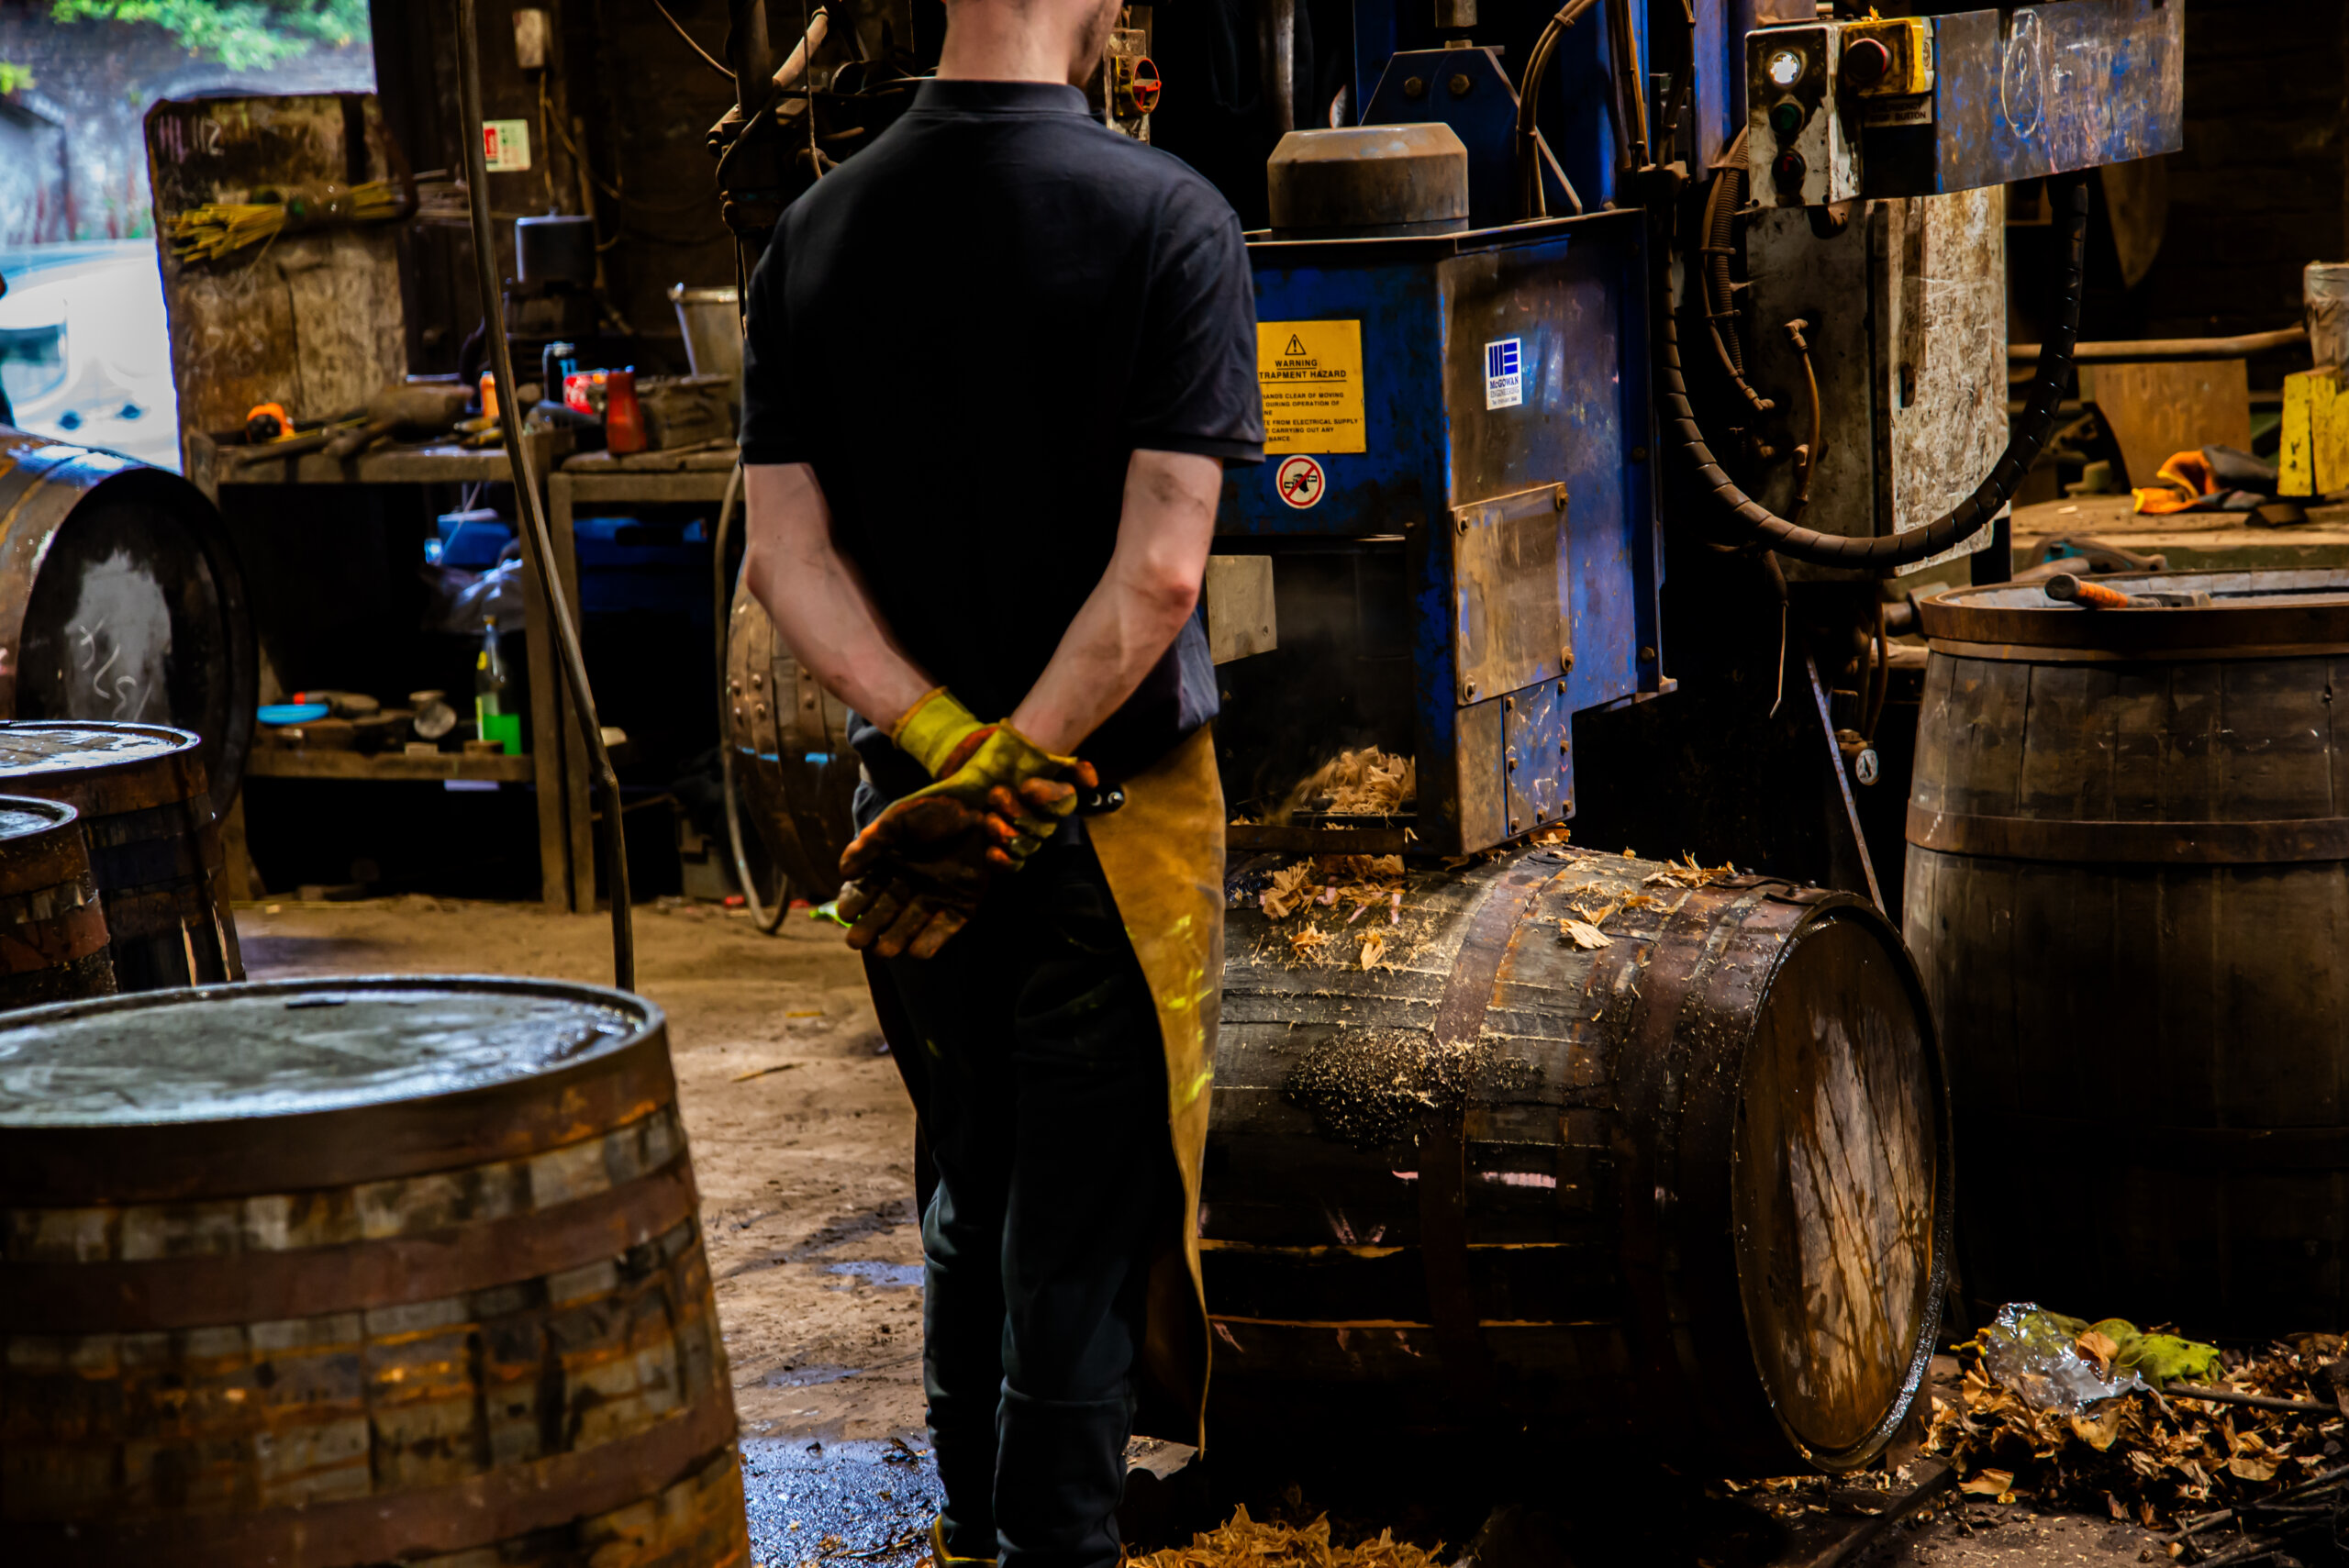 Smoothing the surface of the casks